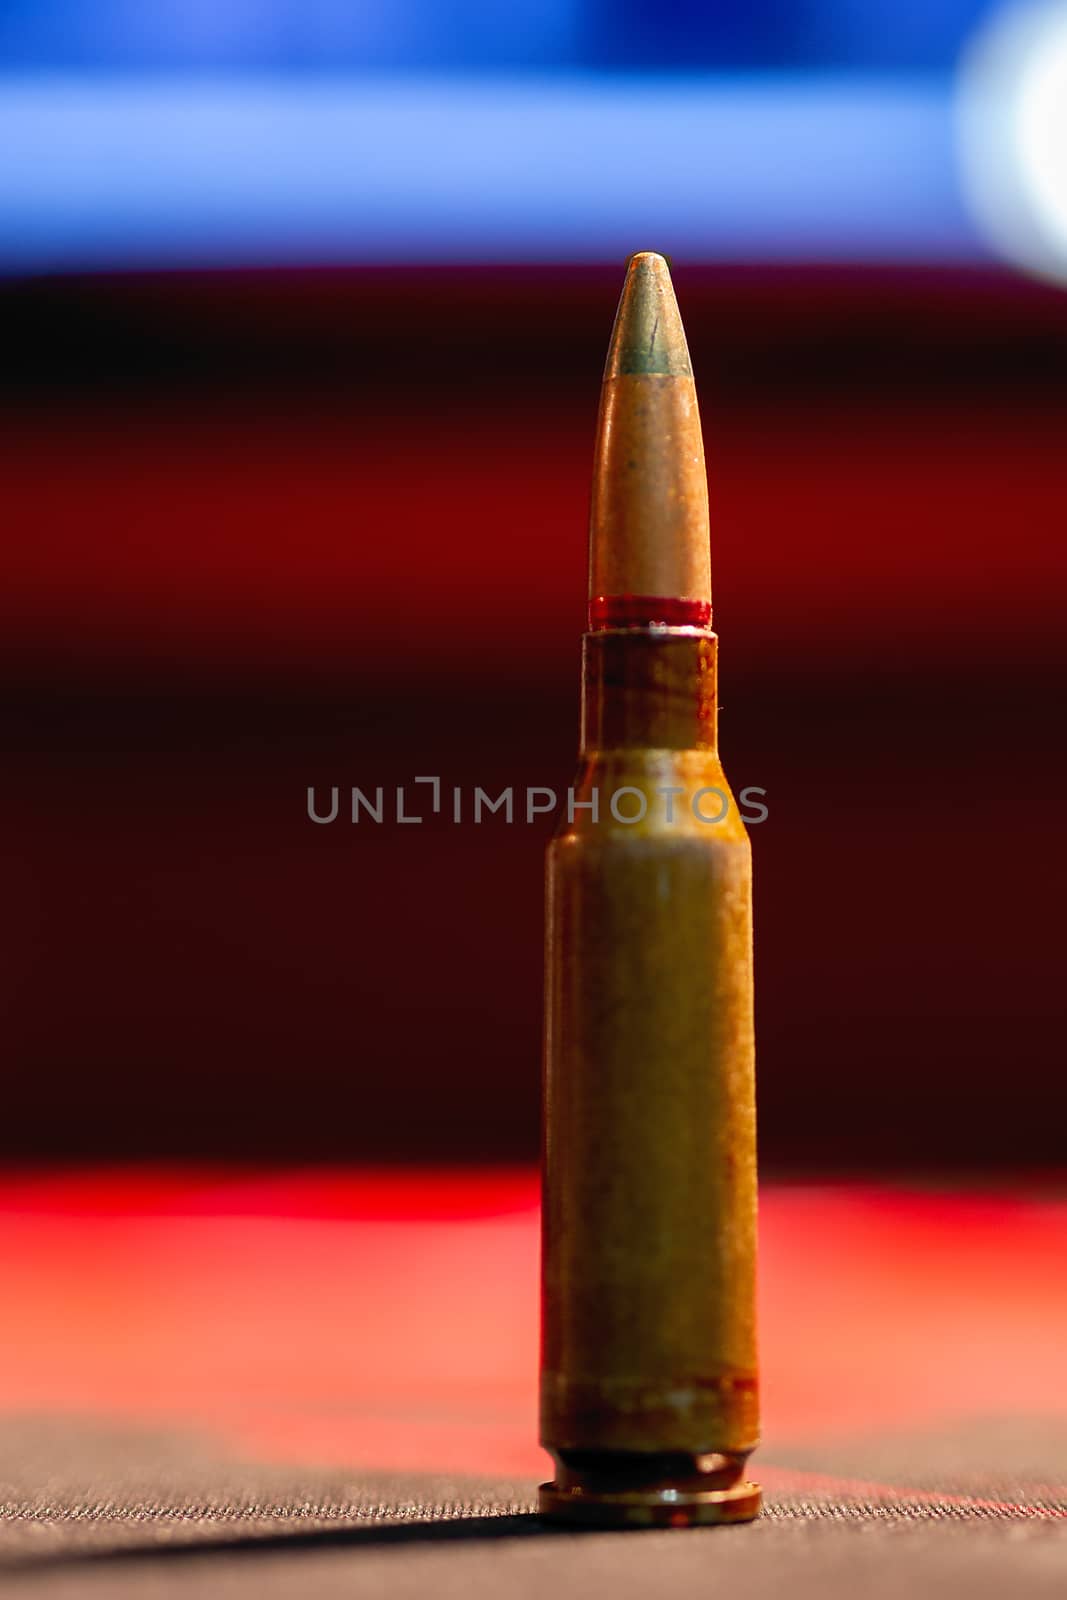 Rifle AK-47 ammo bullet close-up on blurred background. Armor piercing cartridge.